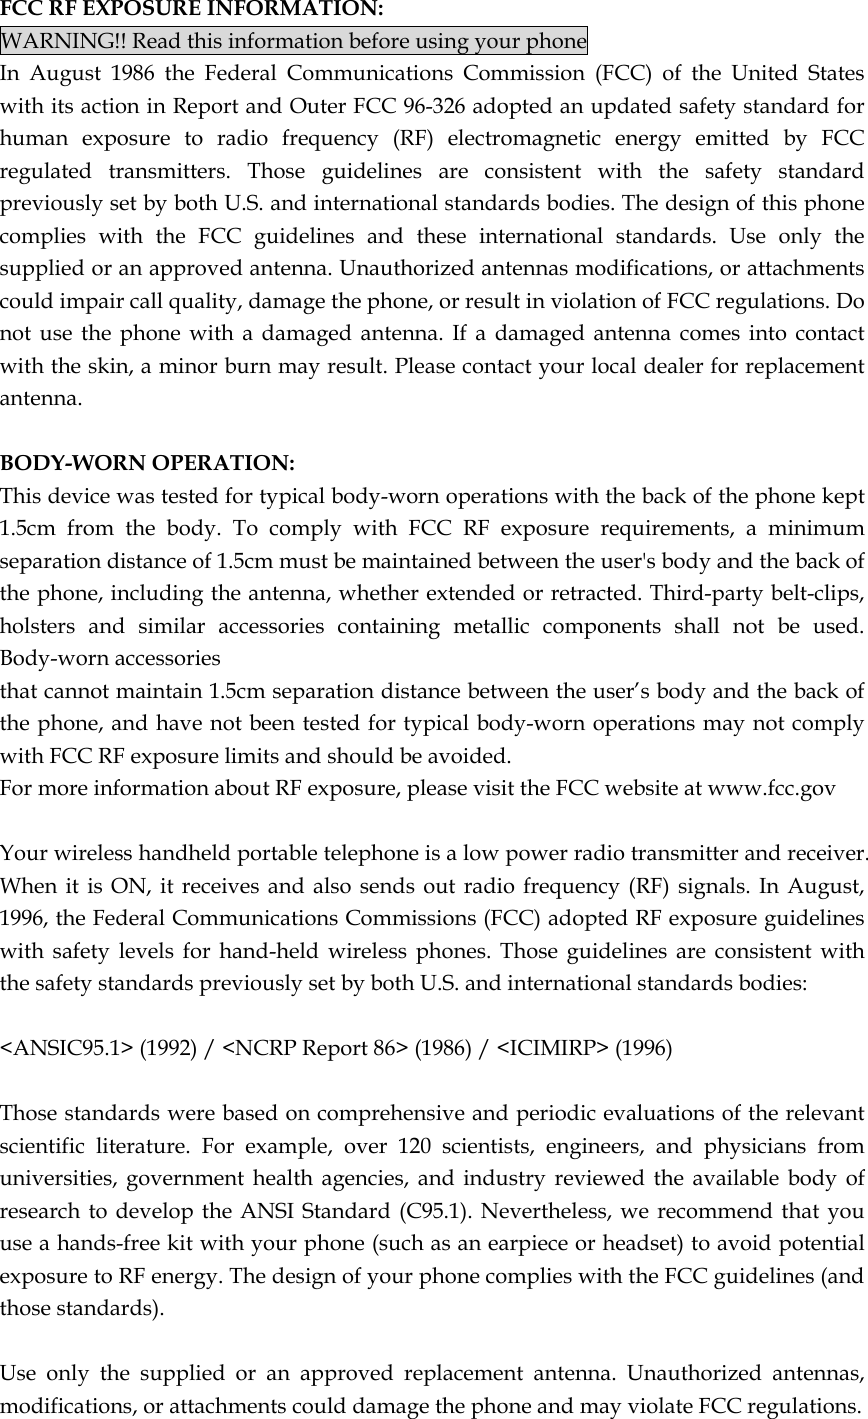 FCC RF EXPOSURE INFORMATION: WARNING!! Read this information before using your phone In August 1986 the Federal Communications Commission (FCC) of the United States with its action in Report and Outer FCC 96-326 adopted an updated safety standard for human exposure to radio frequency (RF) electromagnetic energy emitted by FCC regulated transmitters. Those guidelines are consistent with the safety standard previously set by both U.S. and international standards bodies. The design of this phone complies with the FCC guidelines and these international standards. Use only the supplied or an approved antenna. Unauthorized antennas modifications, or attachments could impair call quality, damage the phone, or result in violation of FCC regulations. Do not use the phone with a damaged antenna. If a damaged antenna comes into contact with the skin, a minor burn may result. Please contact your local dealer for replacement antenna.  BODY-WORN OPERATION: This device was tested for typical body-worn operations with the back of the phone kept 1.5cm from the body. To comply with FCC RF exposure requirements, a minimum separation distance of 1.5cm must be maintained between the user&apos;s body and the back of the phone, including the antenna, whether extended or retracted. Third-party belt-clips, holsters and similar accessories containing metallic components shall not be used. Body-worn accessories that cannot maintain 1.5cm separation distance between the user’s body and the back of the phone, and have not been tested for typical body-worn operations may not comply with FCC RF exposure limits and should be avoided. For more information about RF exposure, please visit the FCC website at www.fcc.gov  Your wireless handheld portable telephone is a low power radio transmitter and receiver. When it is ON, it receives and also sends out radio frequency (RF) signals. In August, 1996, the Federal Communications Commissions (FCC) adopted RF exposure guidelines with safety levels for hand-held wireless phones. Those guidelines are consistent with the safety standards previously set by both U.S. and international standards bodies:  &lt;ANSIC95.1&gt; (1992) / &lt;NCRP Report 86&gt; (1986) / &lt;ICIMIRP&gt; (1996)  Those standards were based on comprehensive and periodic evaluations of the relevant scientific literature. For example, over 120 scientists, engineers, and physicians from universities, government health agencies, and industry reviewed the available body of research to develop the ANSI Standard (C95.1). Nevertheless, we recommend that you use a hands-free kit with your phone (such as an earpiece or headset) to avoid potential exposure to RF energy. The design of your phone complies with the FCC guidelines (and those standards).  Use only the supplied or an approved replacement antenna. Unauthorized antennas, modifications, or attachments could damage the phone and may violate FCC regulations.   